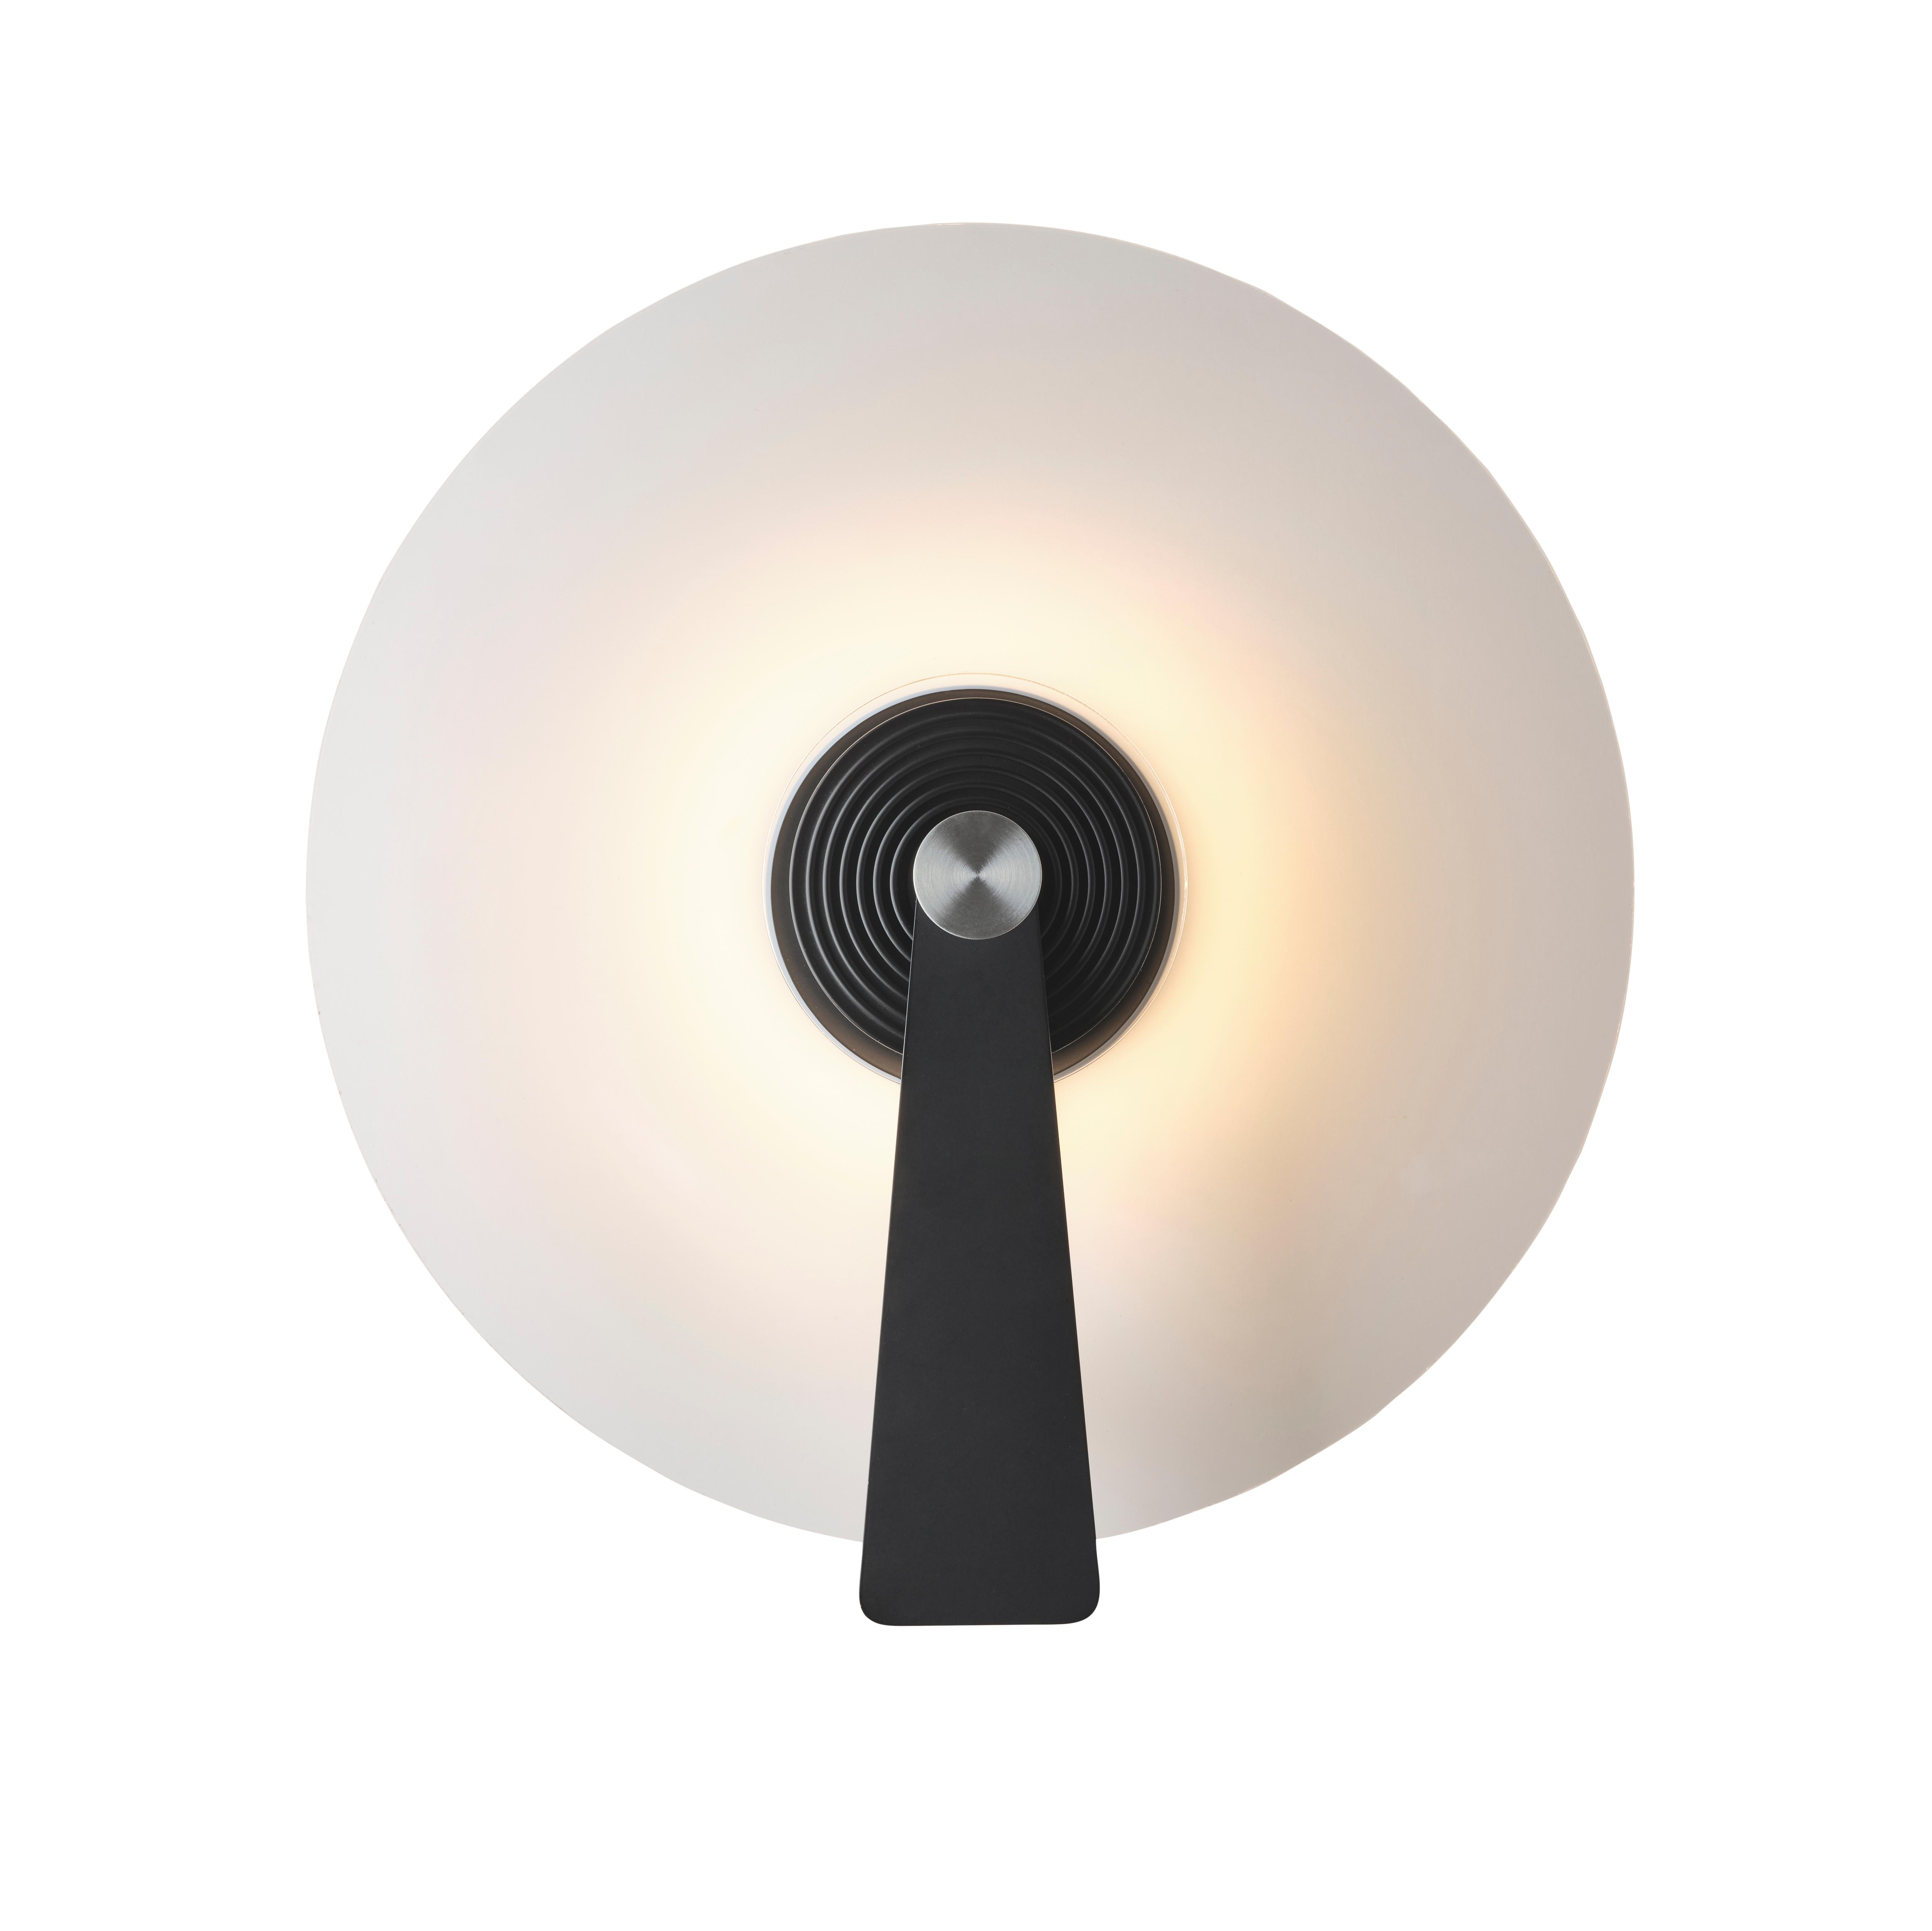 DCW Editions Pan Wall Lamp in Black Aluminium by Simon Schmitz
 
 Across the globe, light evolves over time.
 From the soft and reassuring light of the candle to the raw LED brightness of the refrigerator light, centuries have passed.
 Are we at the